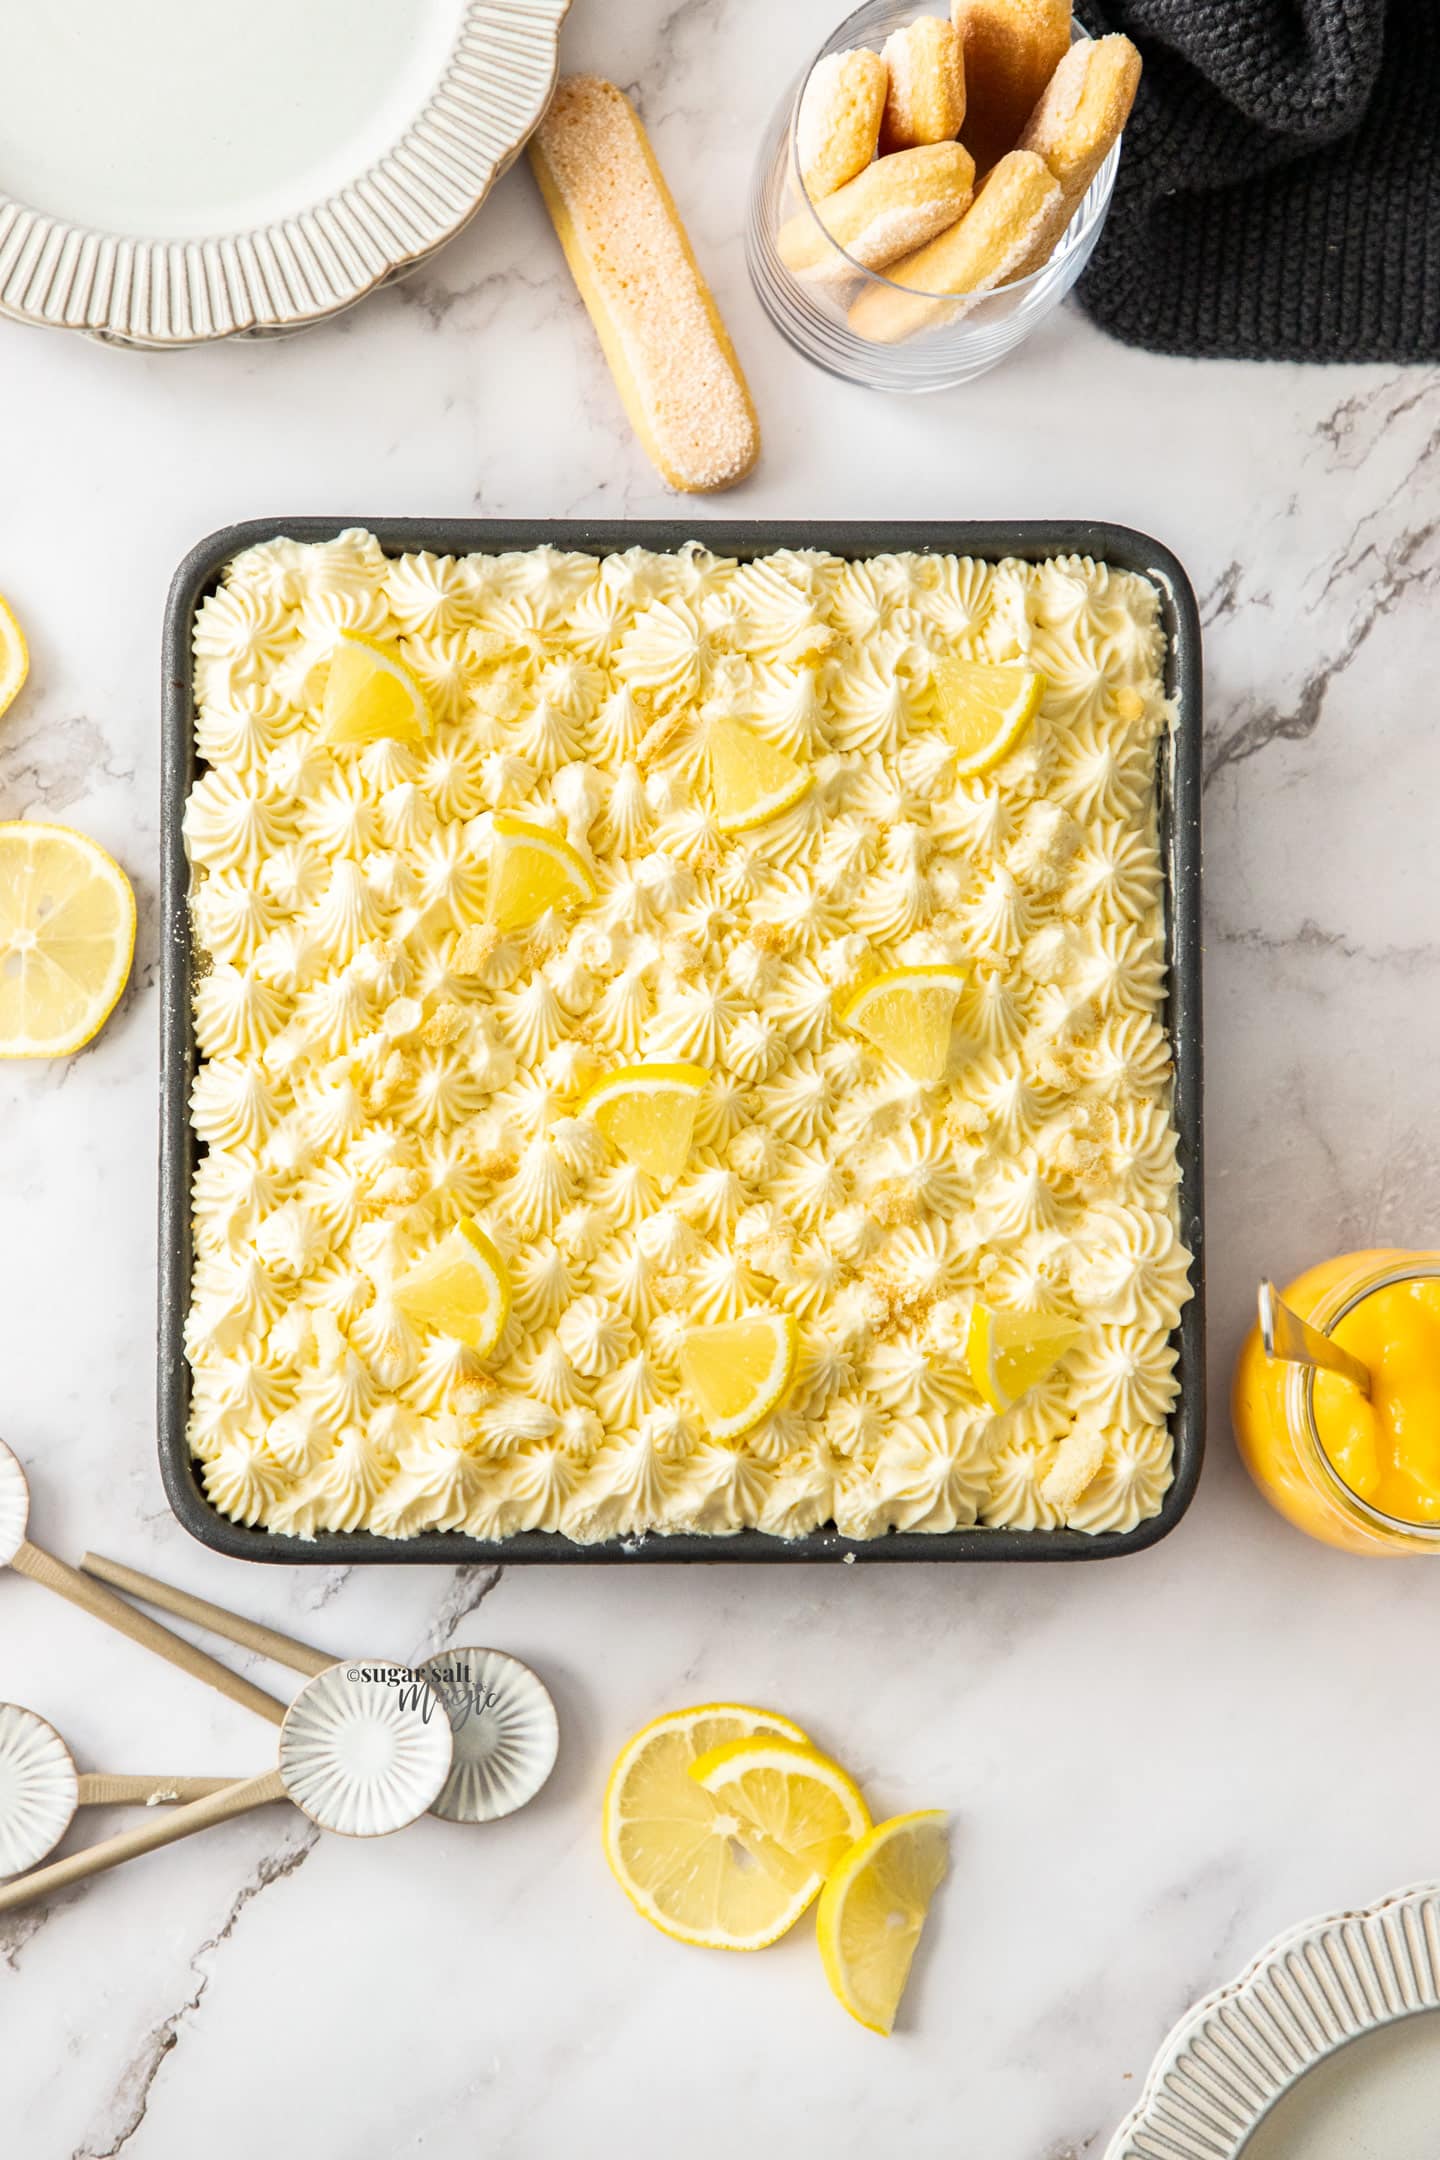 Top down view of lemon tiramisu in a pan surrounded by lemon slices and plates.